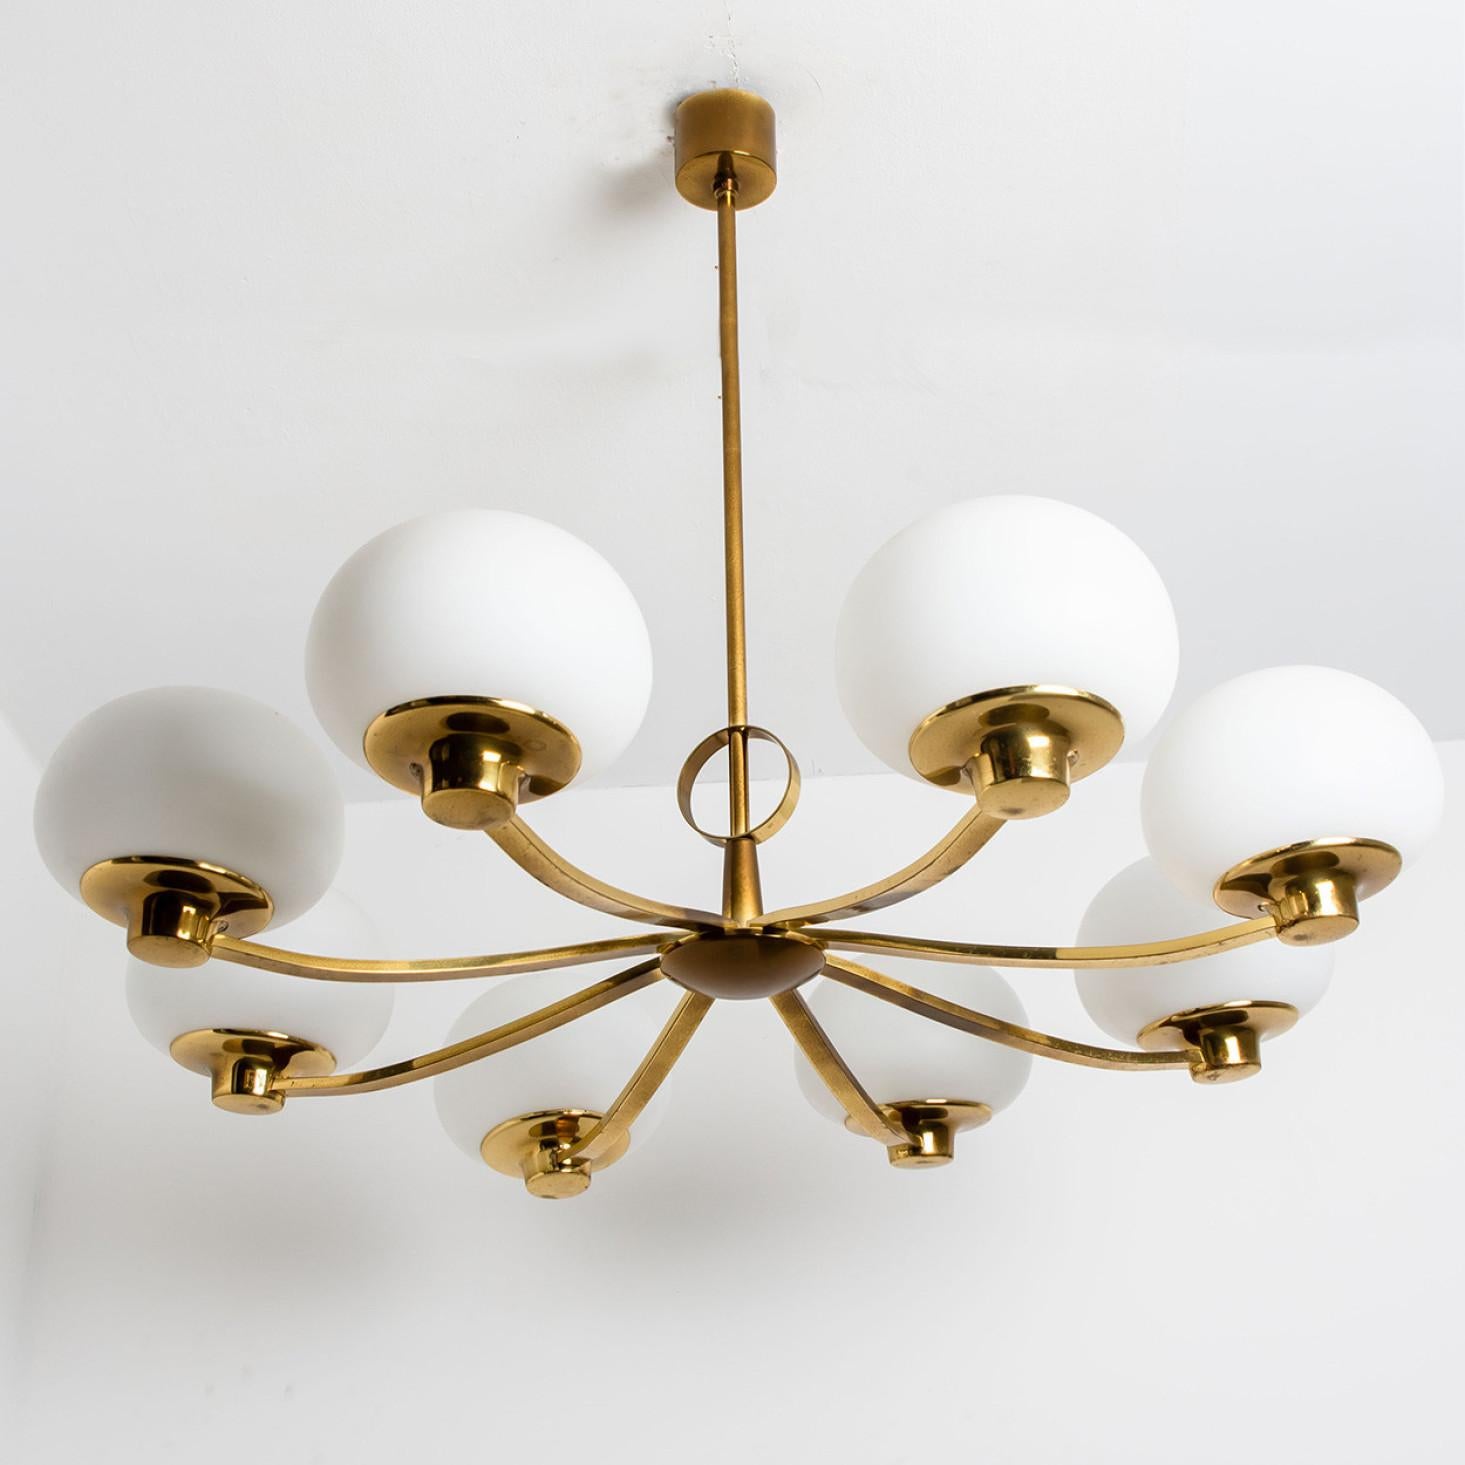 Beautiful chandelier by Hillebrand. Manufactured in Germany, circa 1960.
With beautiful glass shades and brass details on a brass mounting hardware. The chandelier shows 8 arms, each with an opaque white glass shade. This chandelier illuminates